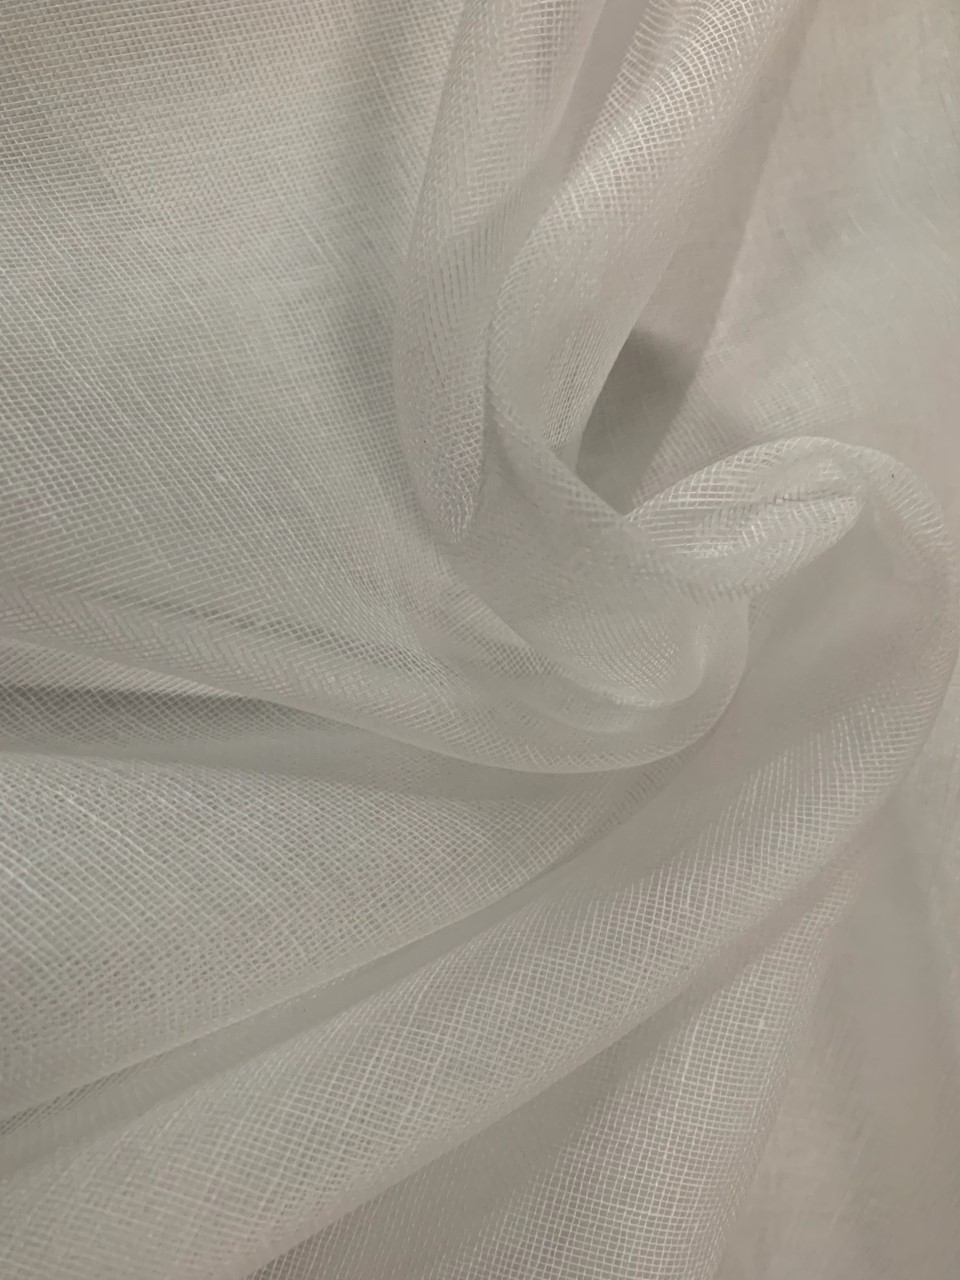 Grade 60 White Cheesecloth Roll - 1000 Yards 30" Wide